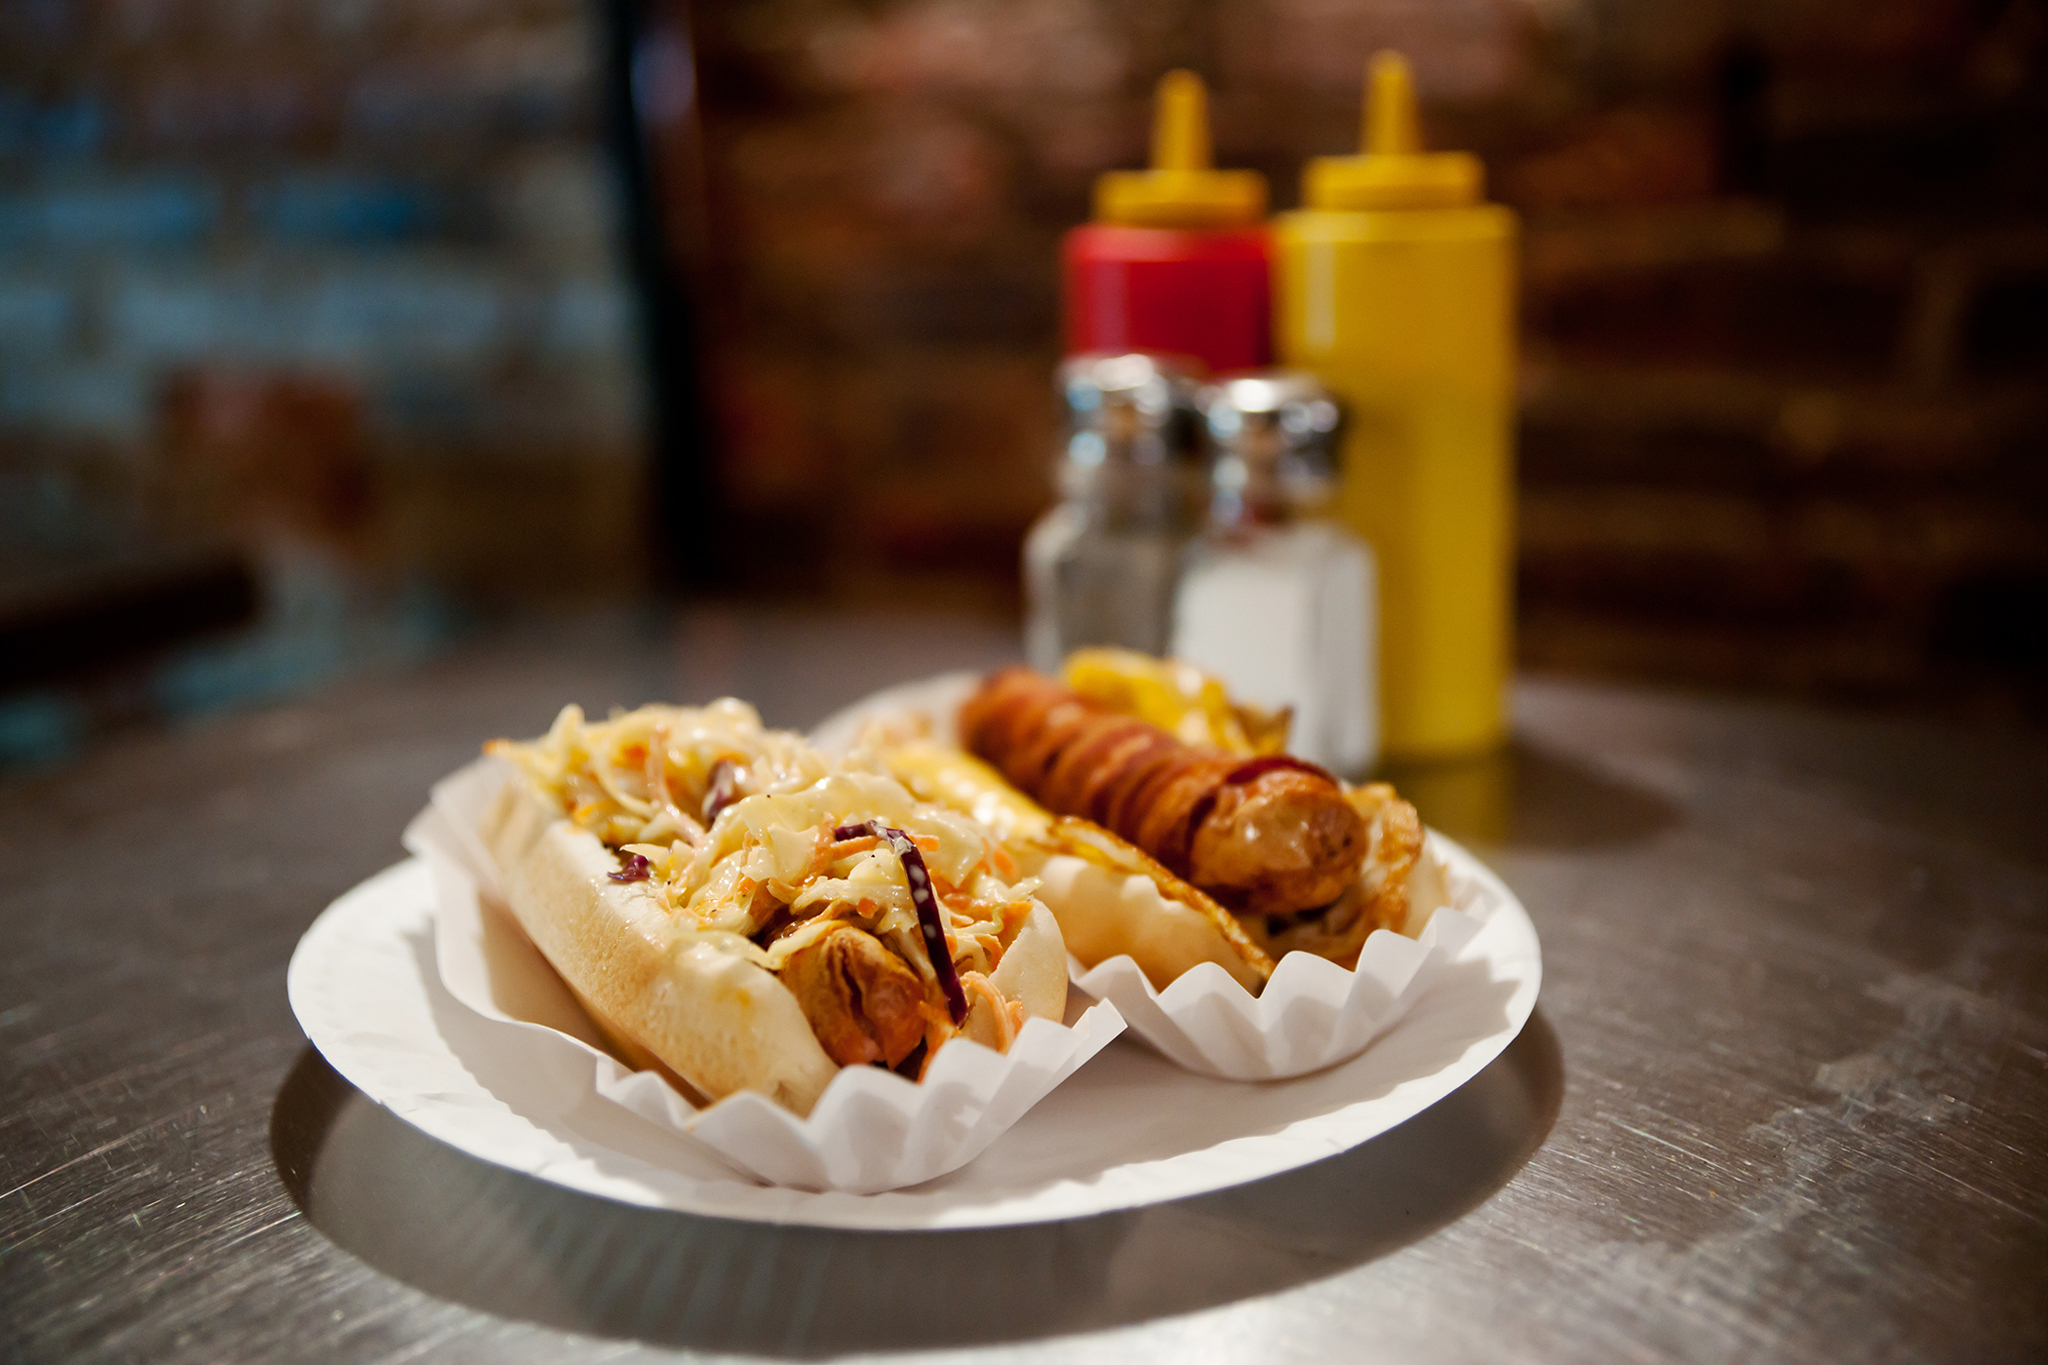 Korean Corn Dogs Are In London! Here's Where You Can Get Them